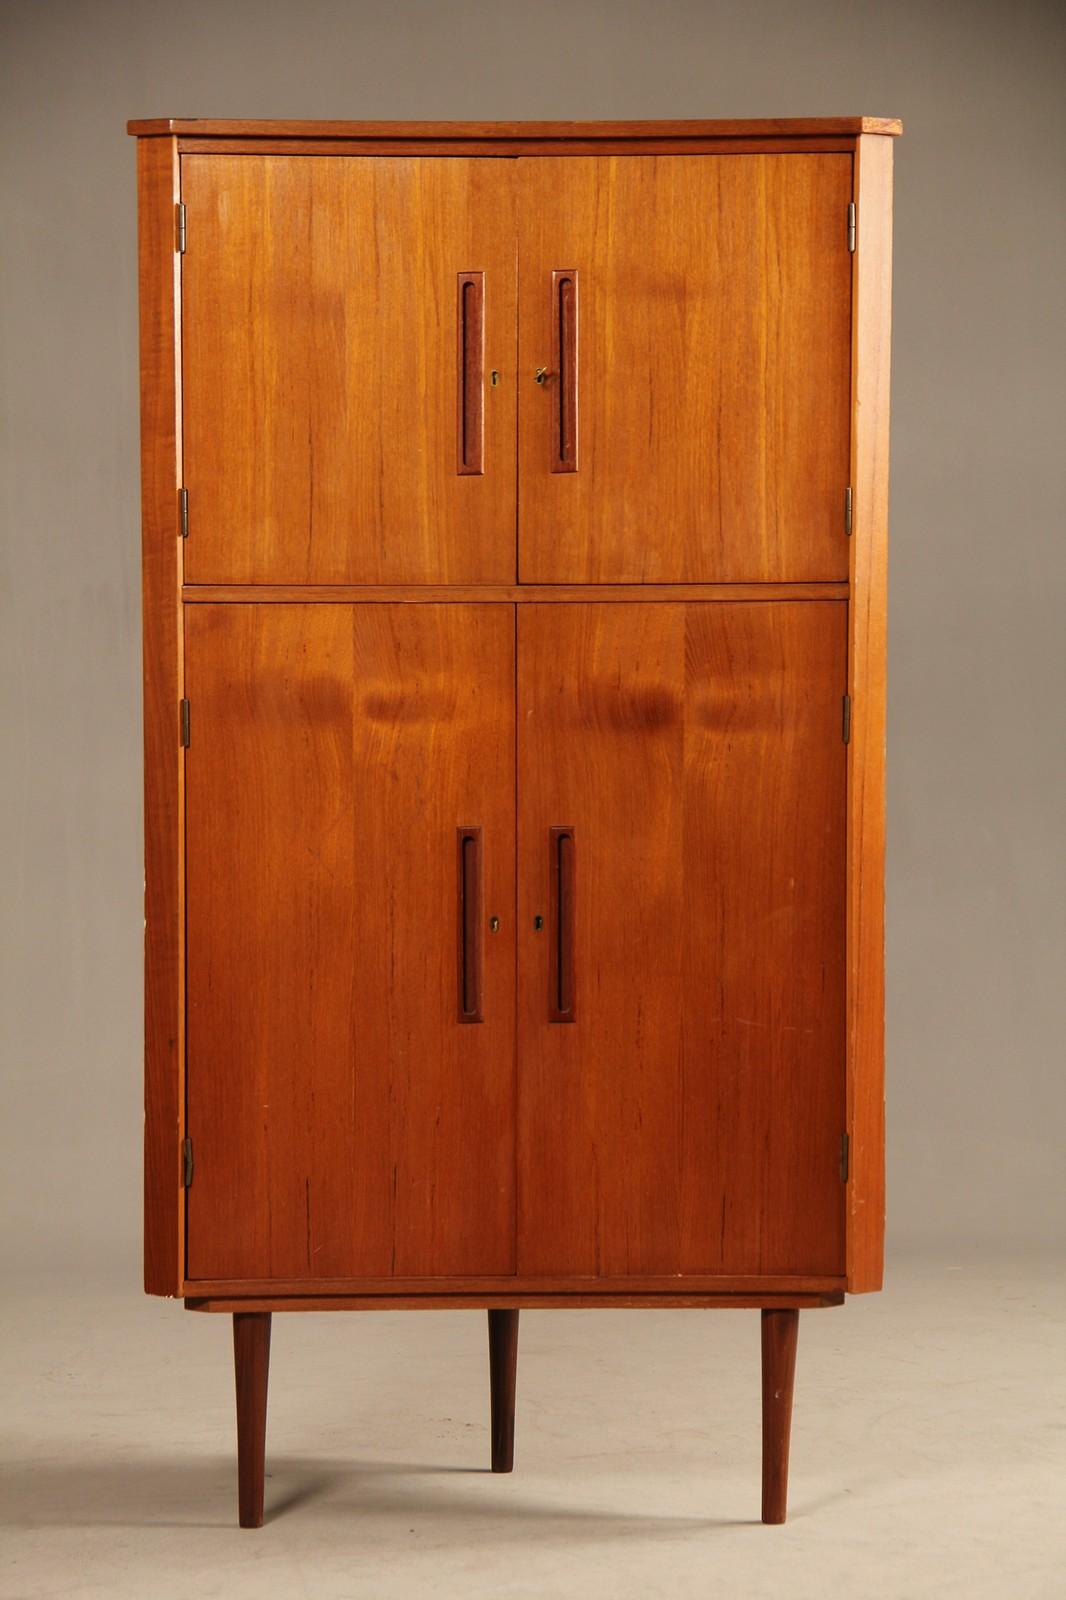 Danish Mid-Century Modern corner cabinet of finished teak wood with doors which open to reveal shelves. Key included.